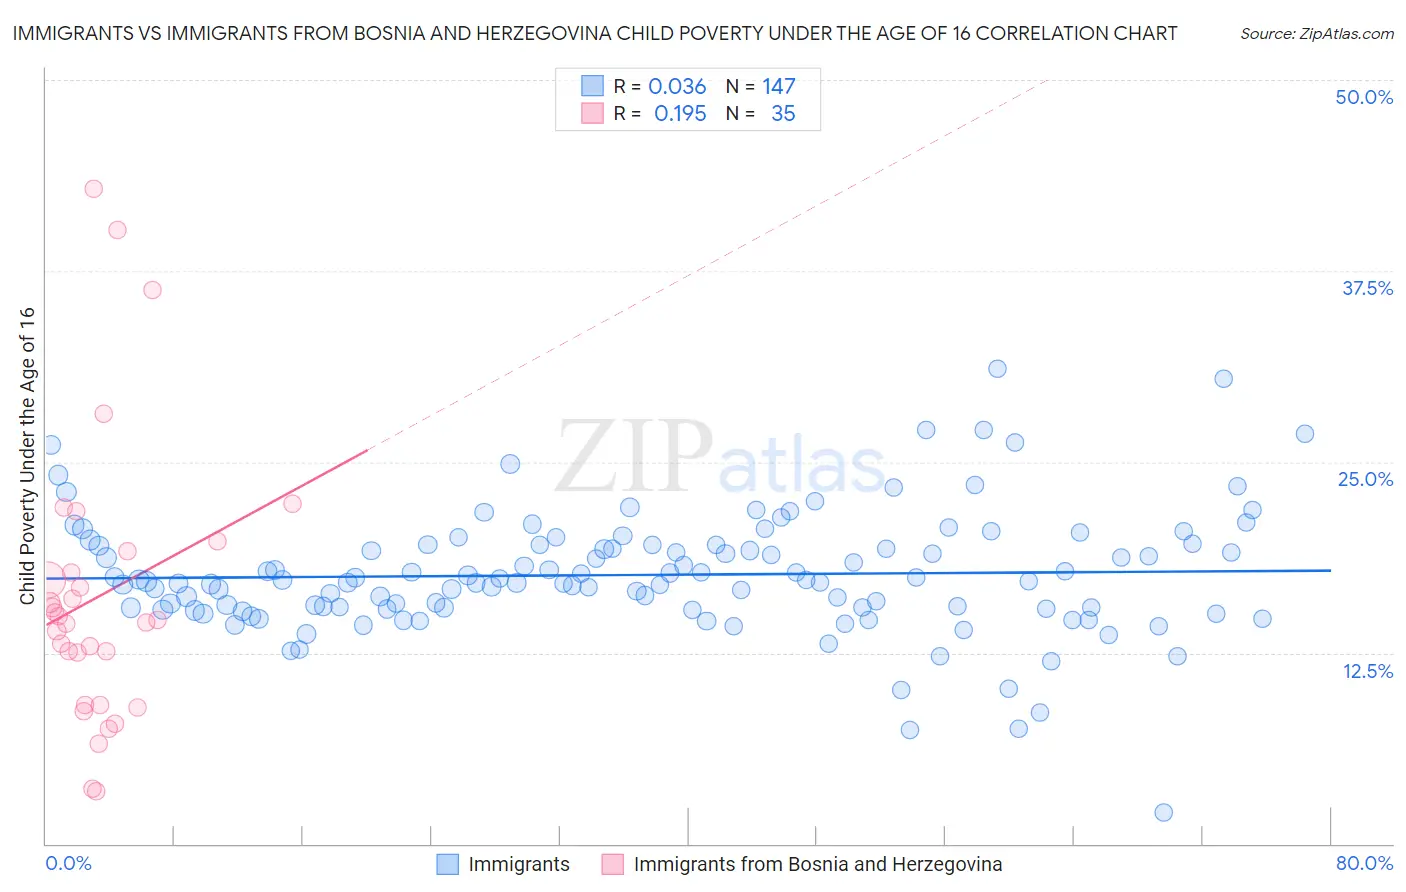 Immigrants vs Immigrants from Bosnia and Herzegovina Child Poverty Under the Age of 16